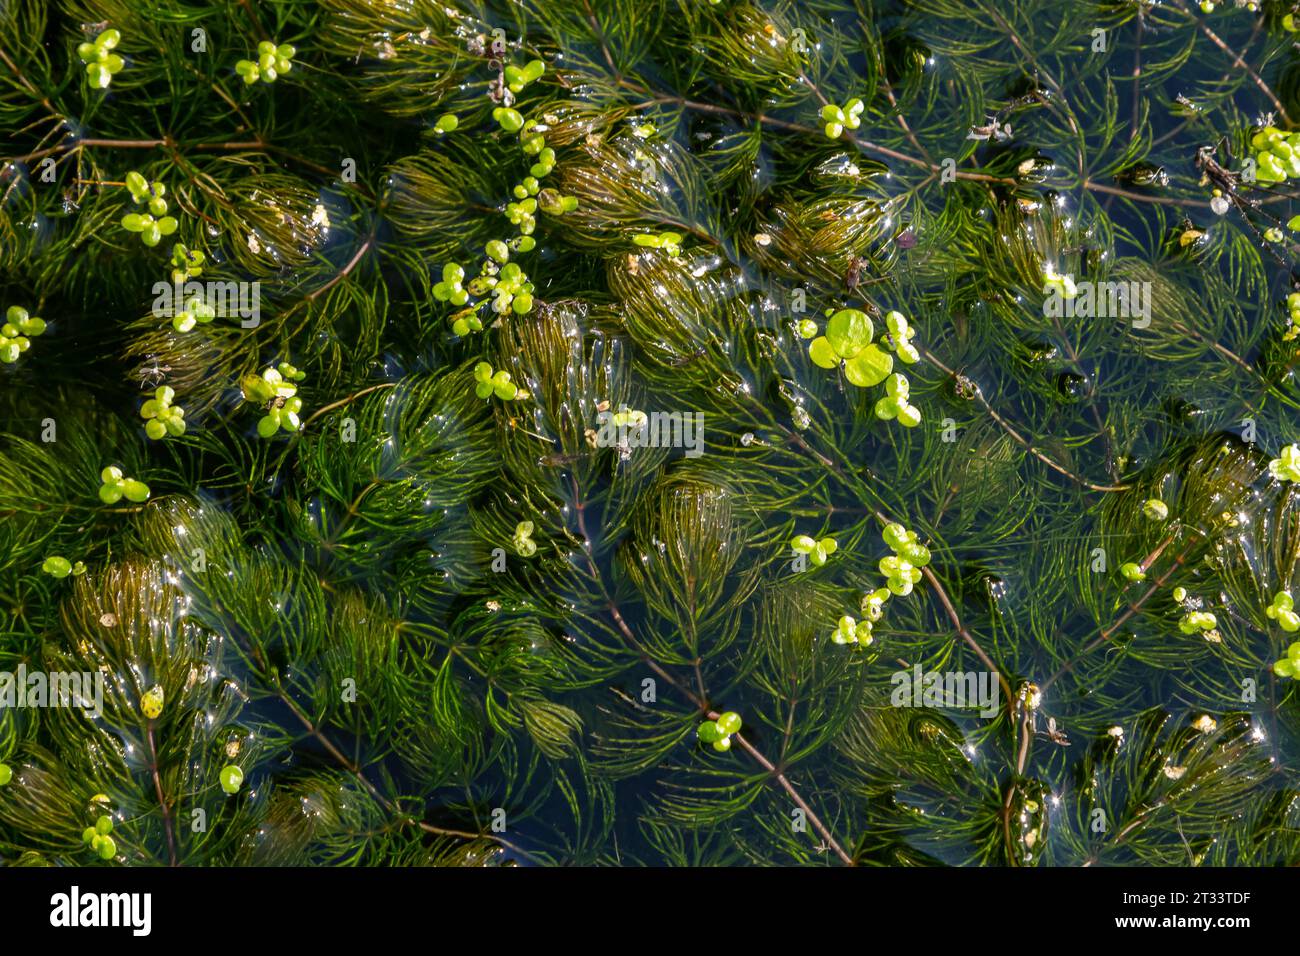 Close up of the aquatic plant Ceratophyllum coontails, hornworts floating on the surface of the water in a pond. Europe. Stock Photo